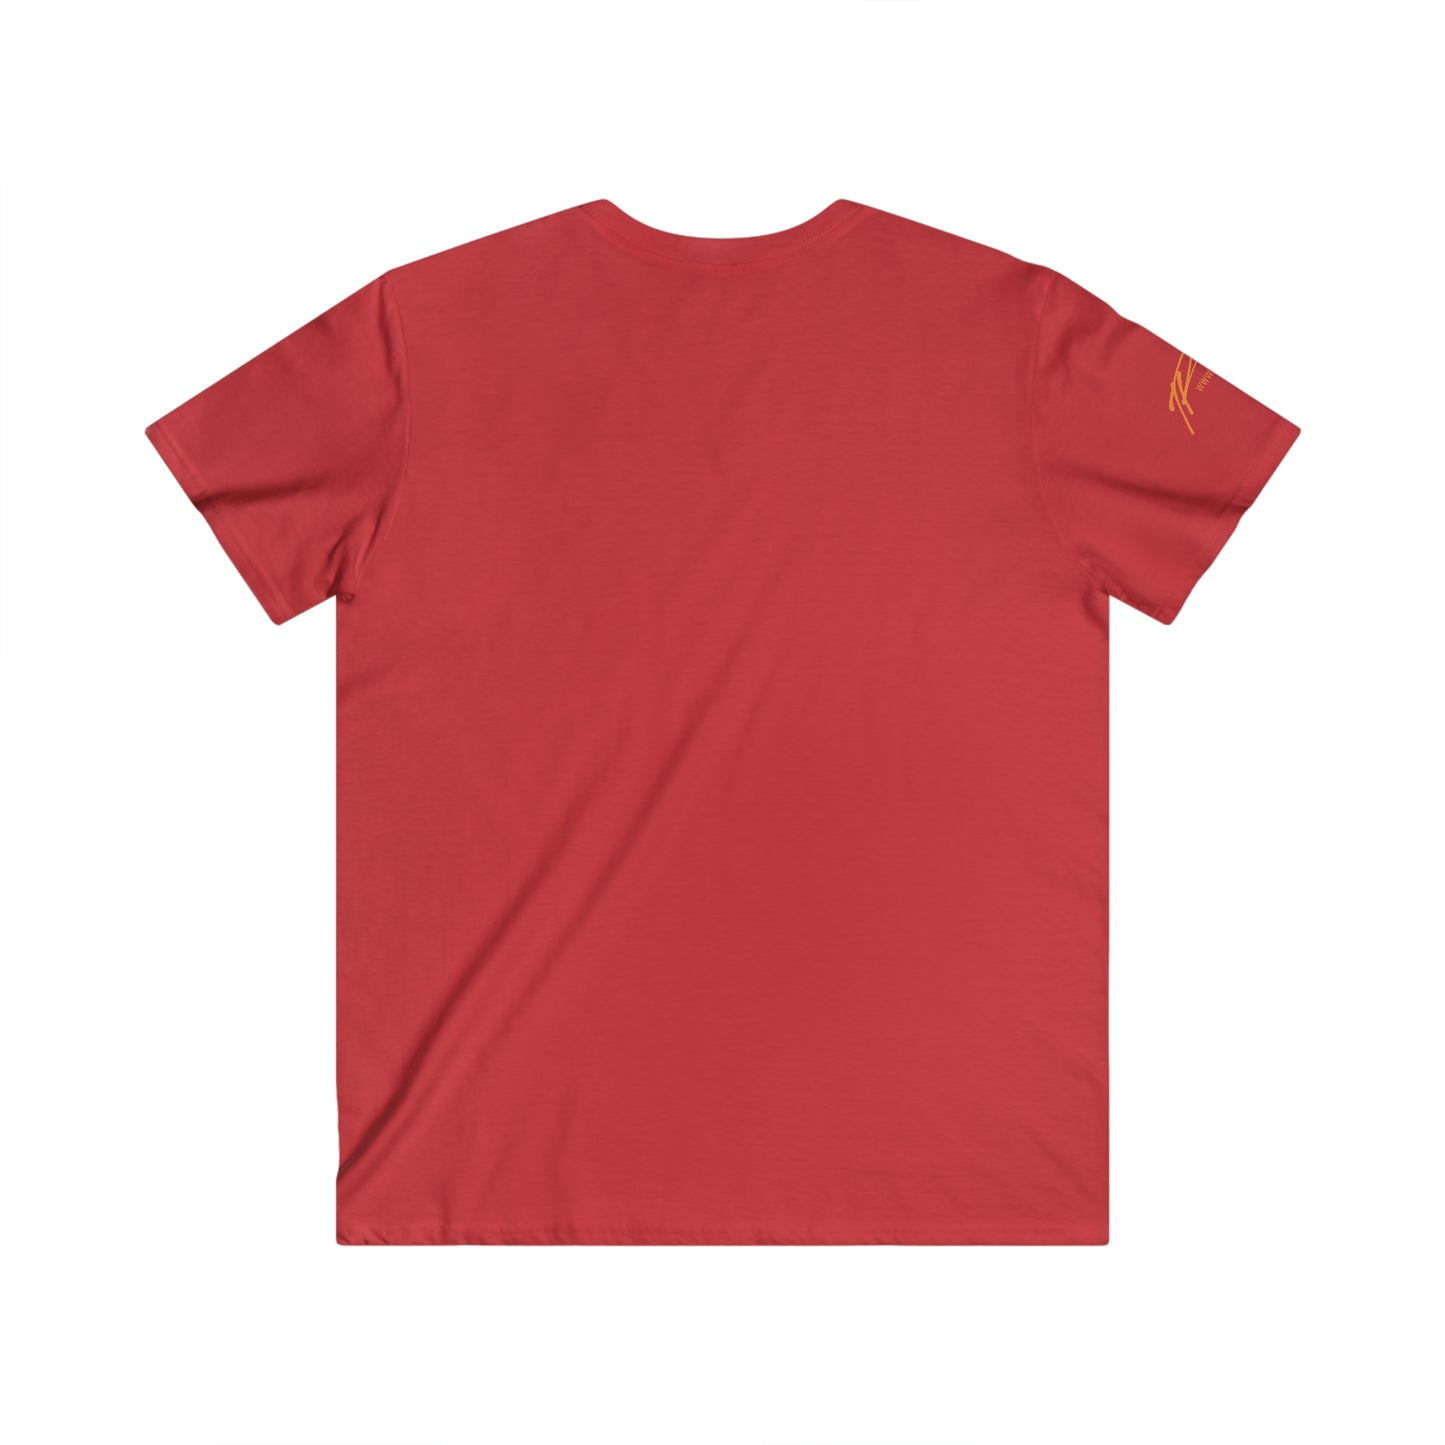 Tipping Points - SF - UltraSoft Unisex V-neck Tee